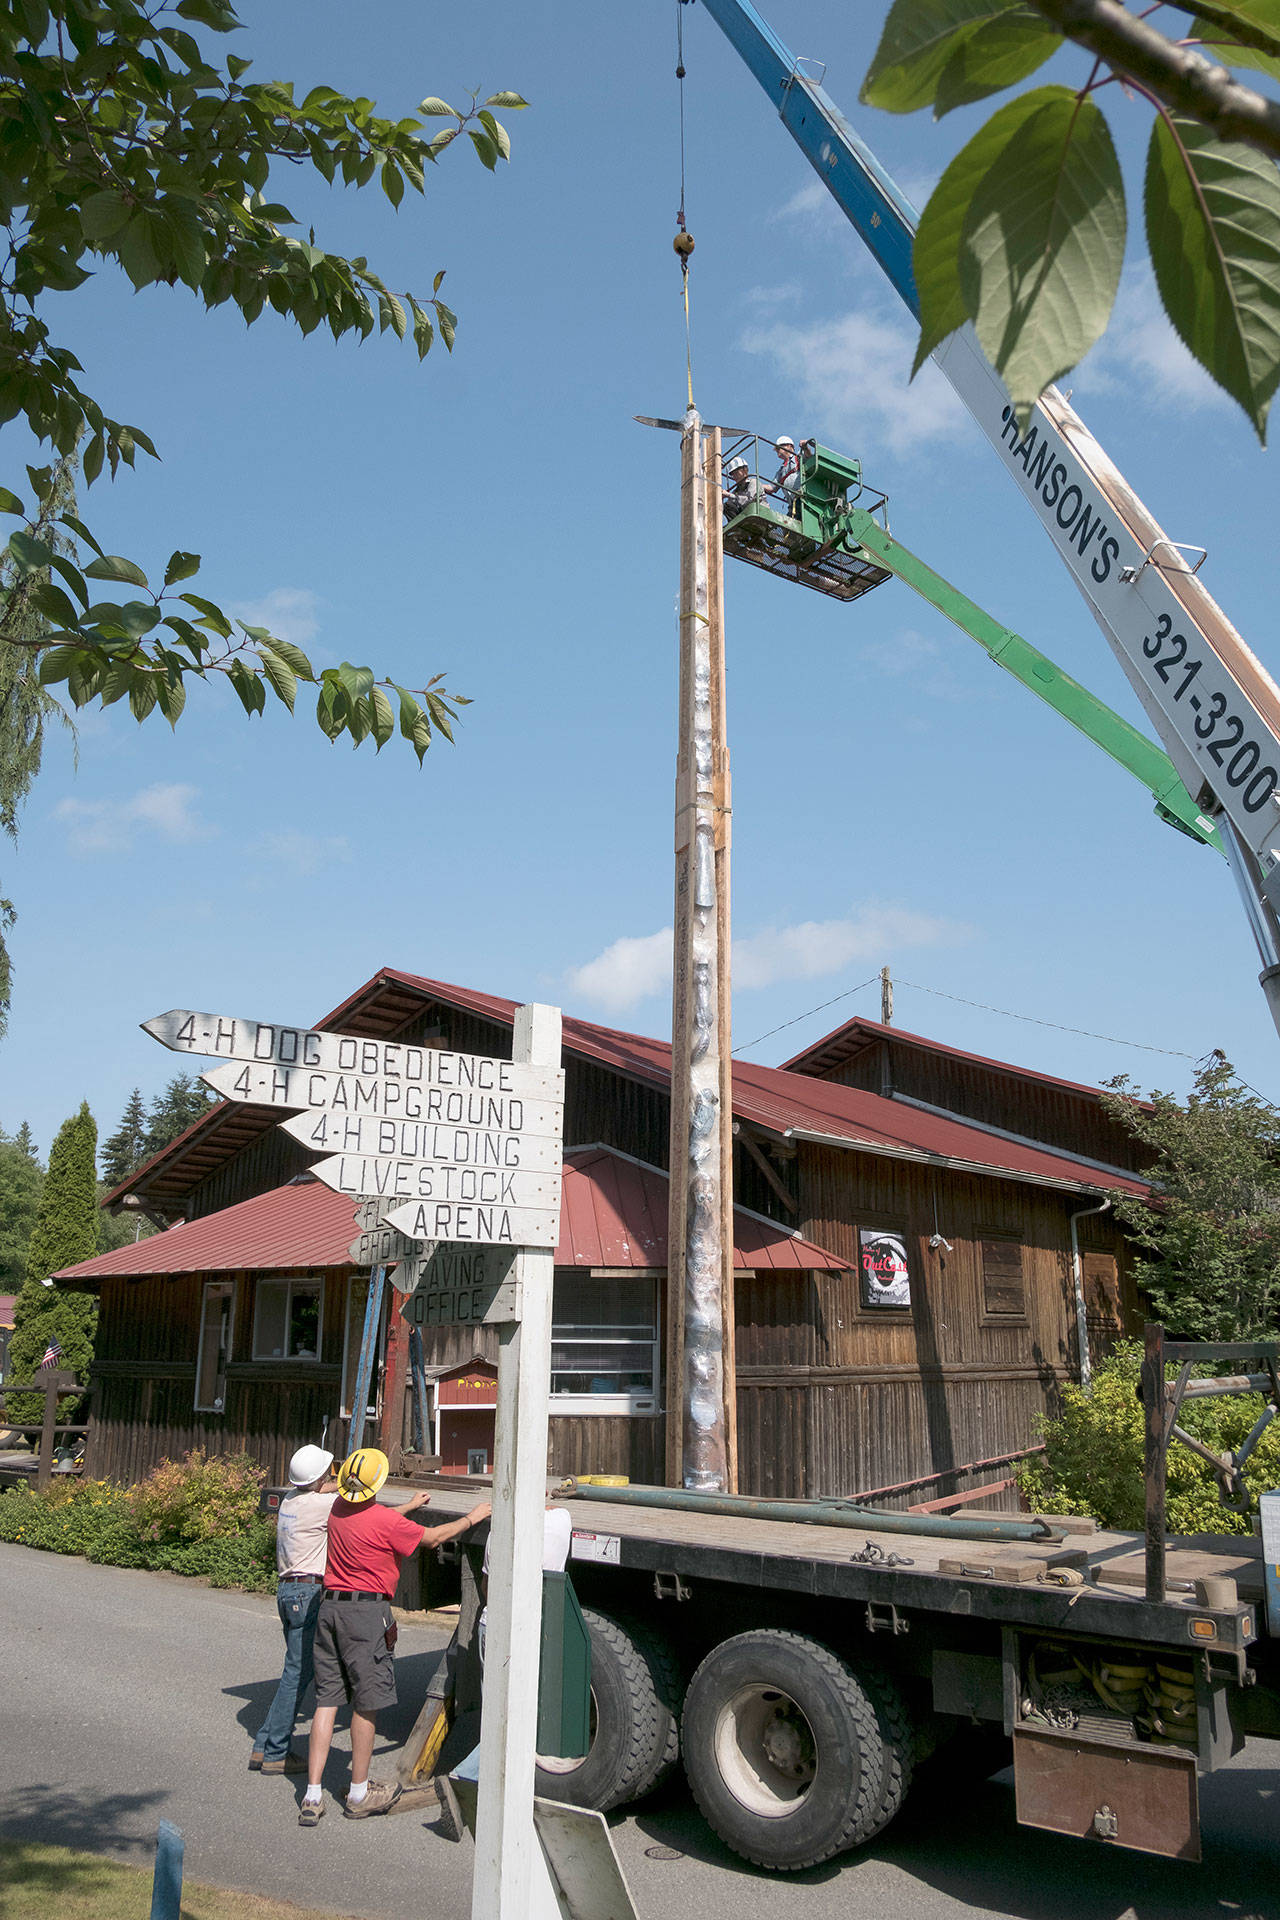 On June 6, the 50-foot story pole was wrapped                                in a wood sleeve before being taken down for safety reasons and preservation assessment. Photo provided by George Masters